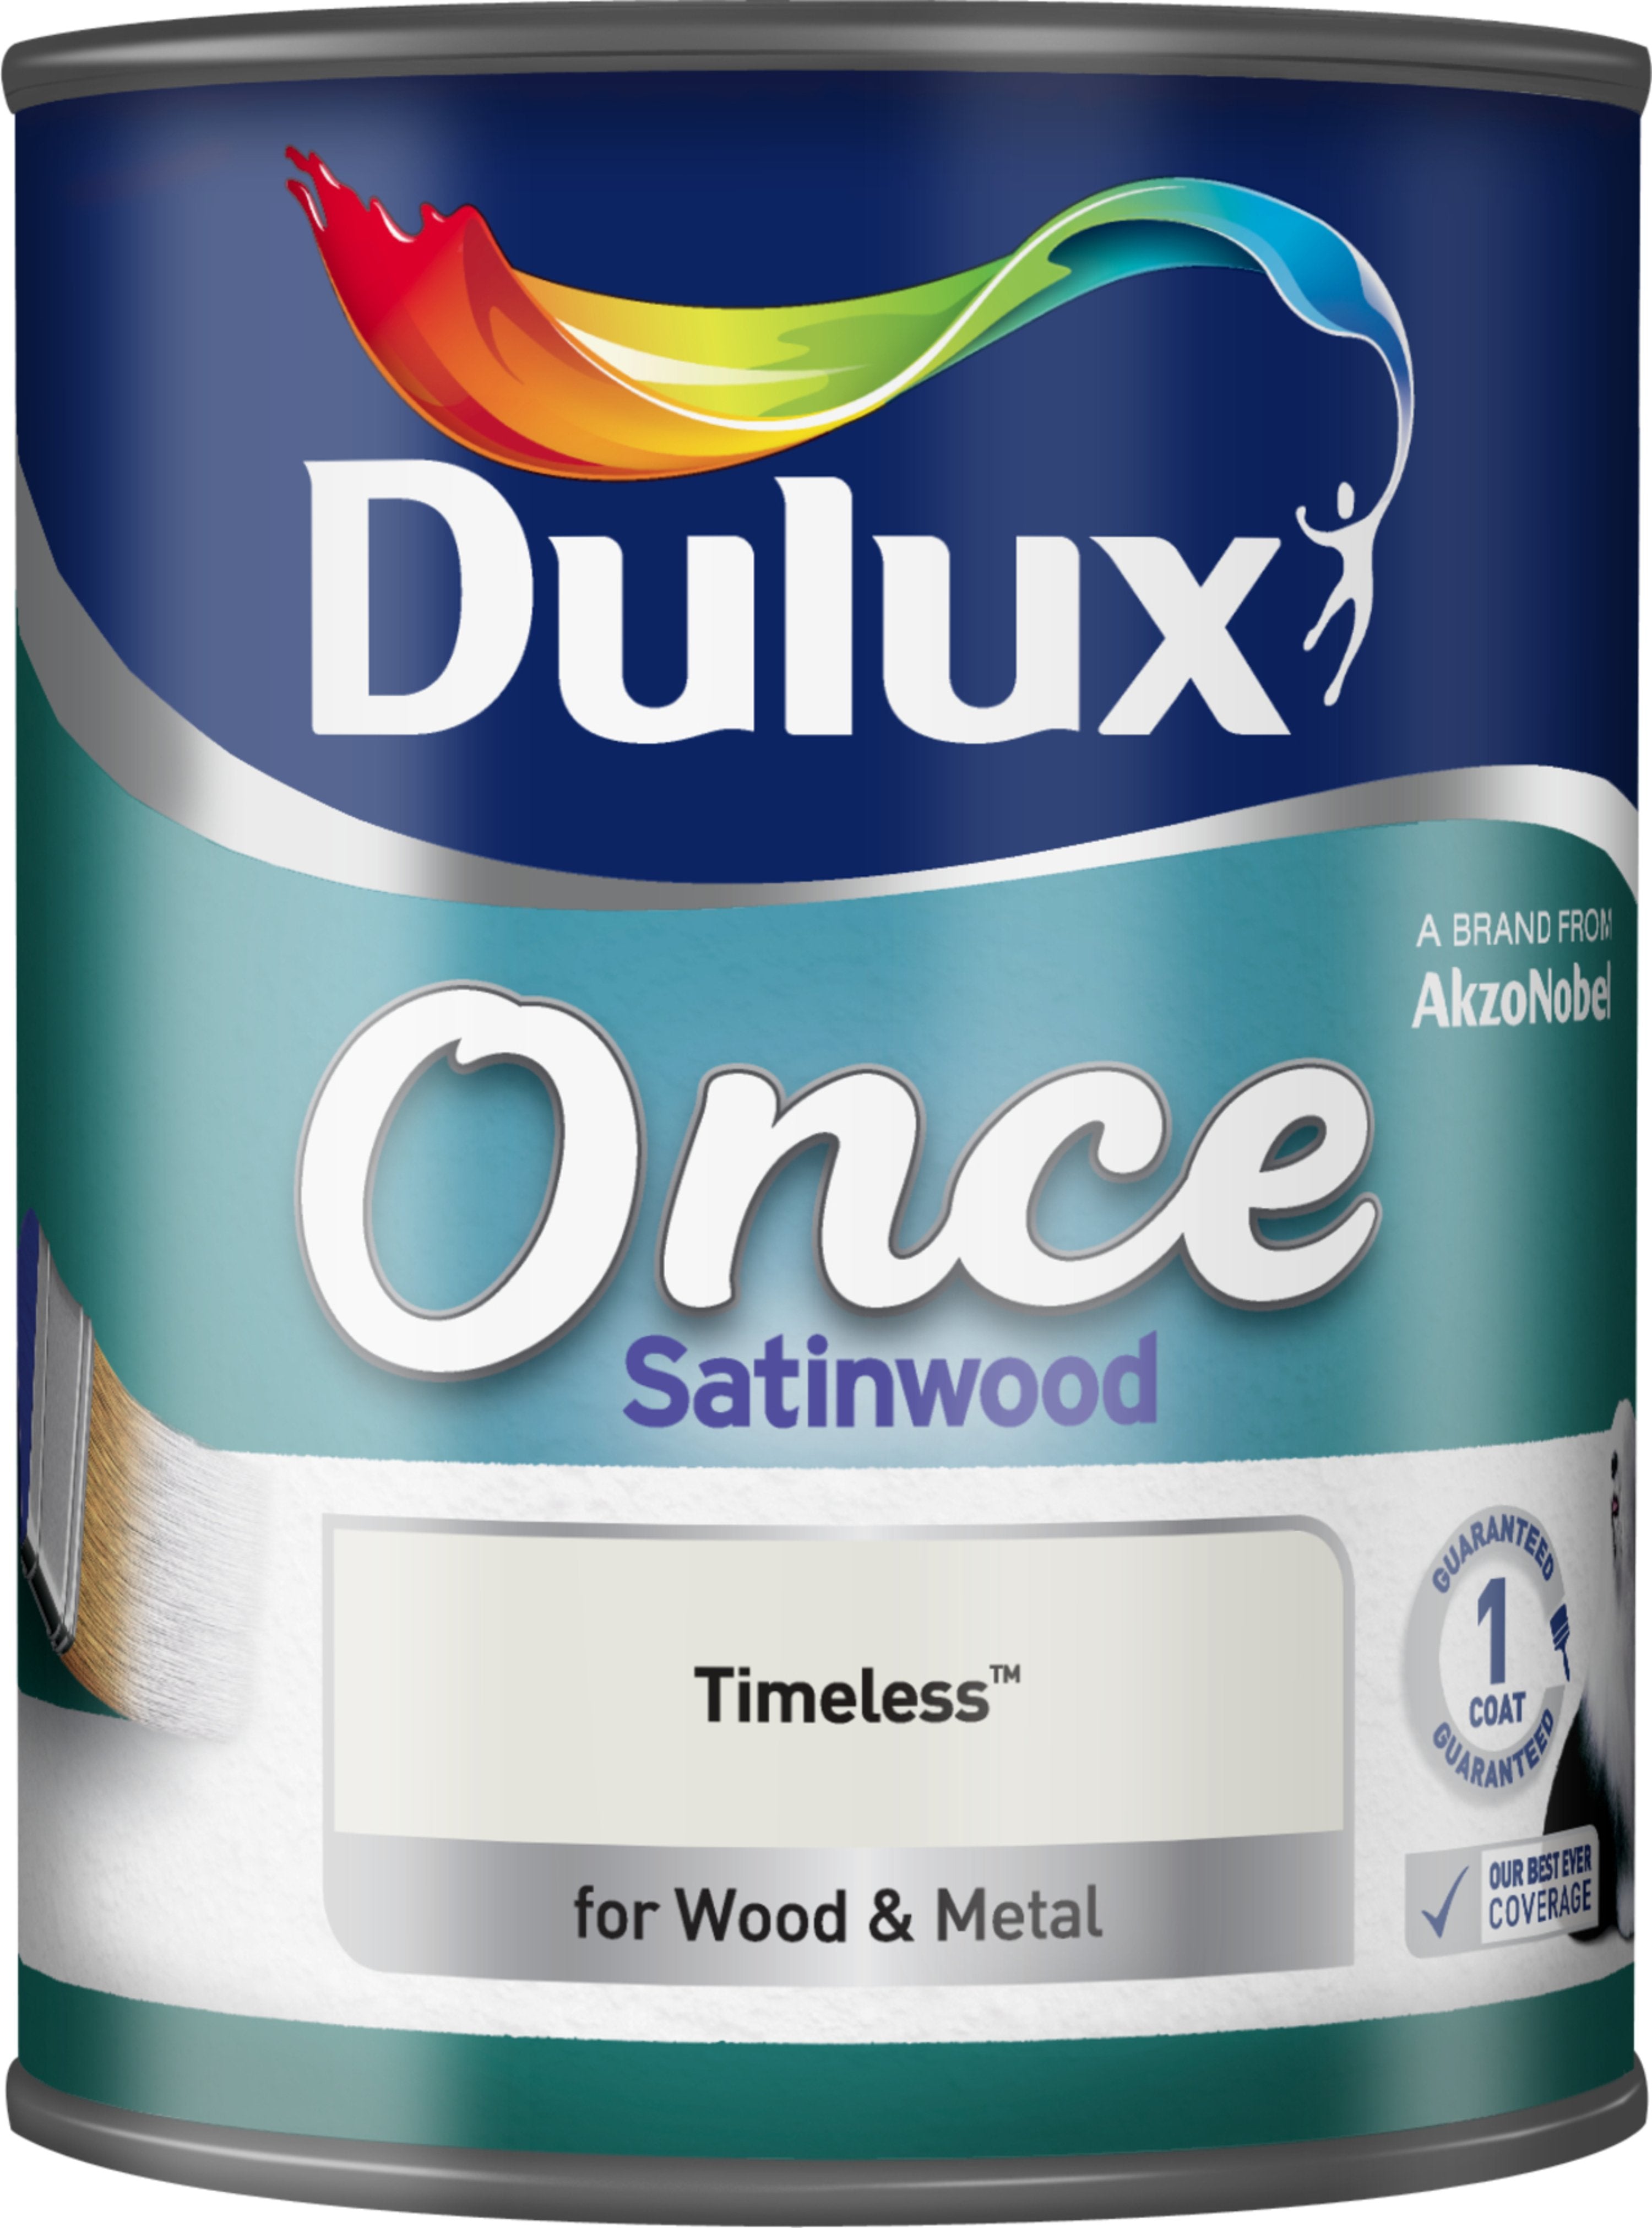 Dulux-Once-Satinwood-Paint-For-Wood-And-Metal-Timeless-750ml